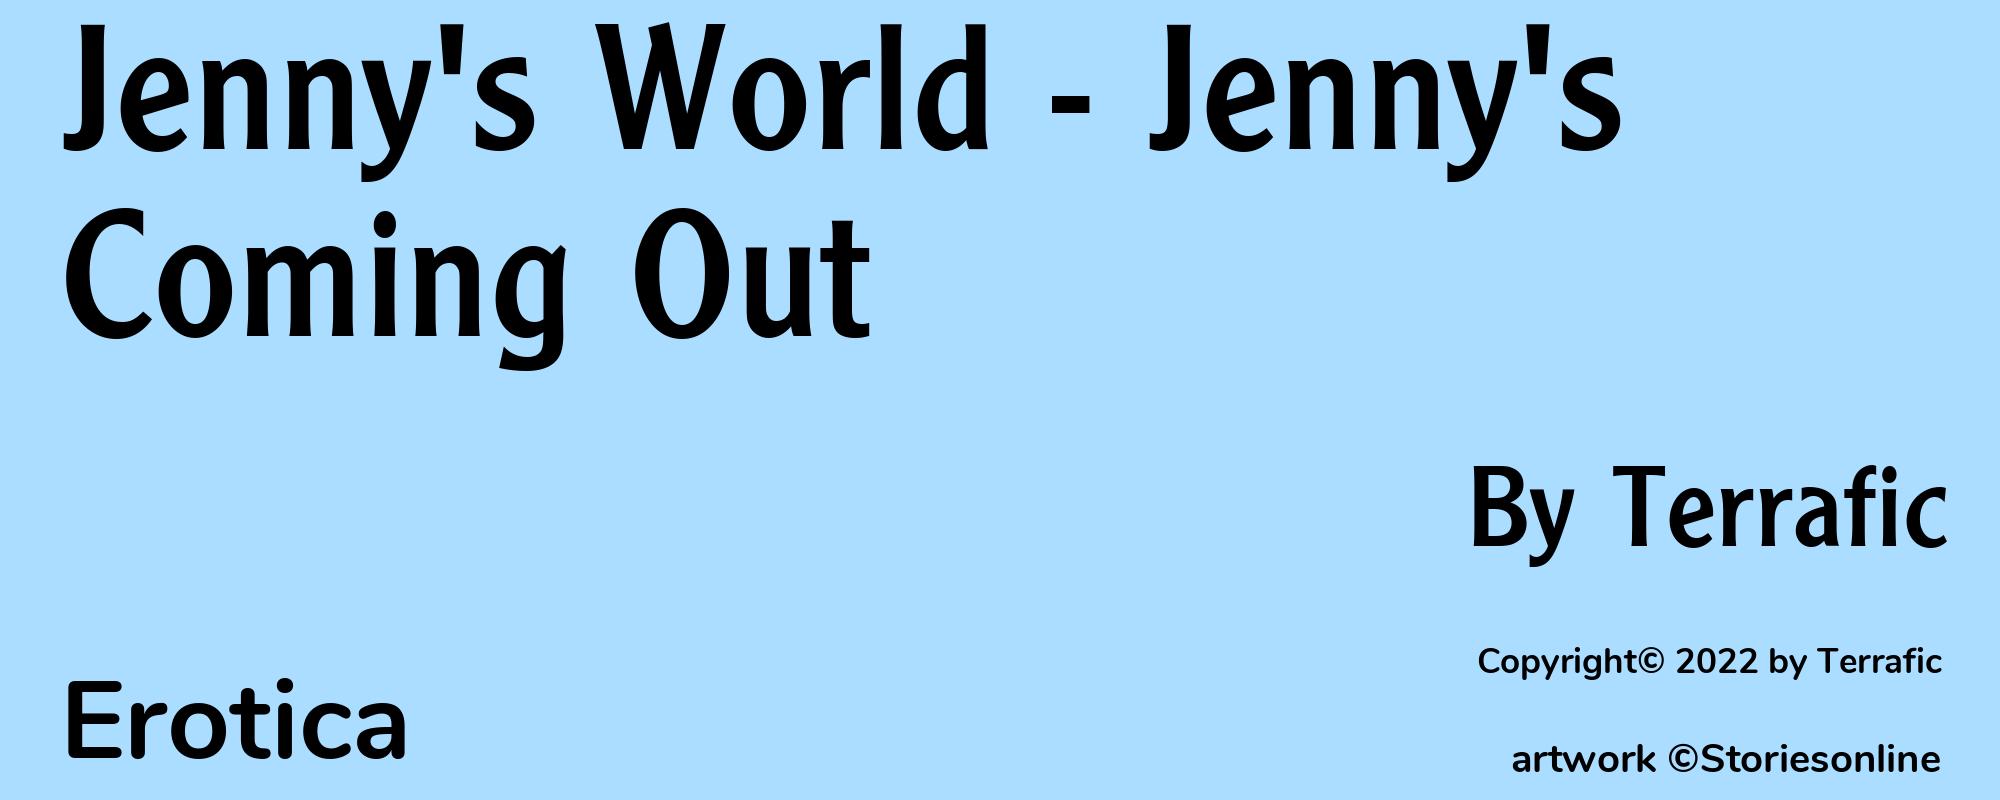 Jenny's World - Jenny's Coming Out - Cover